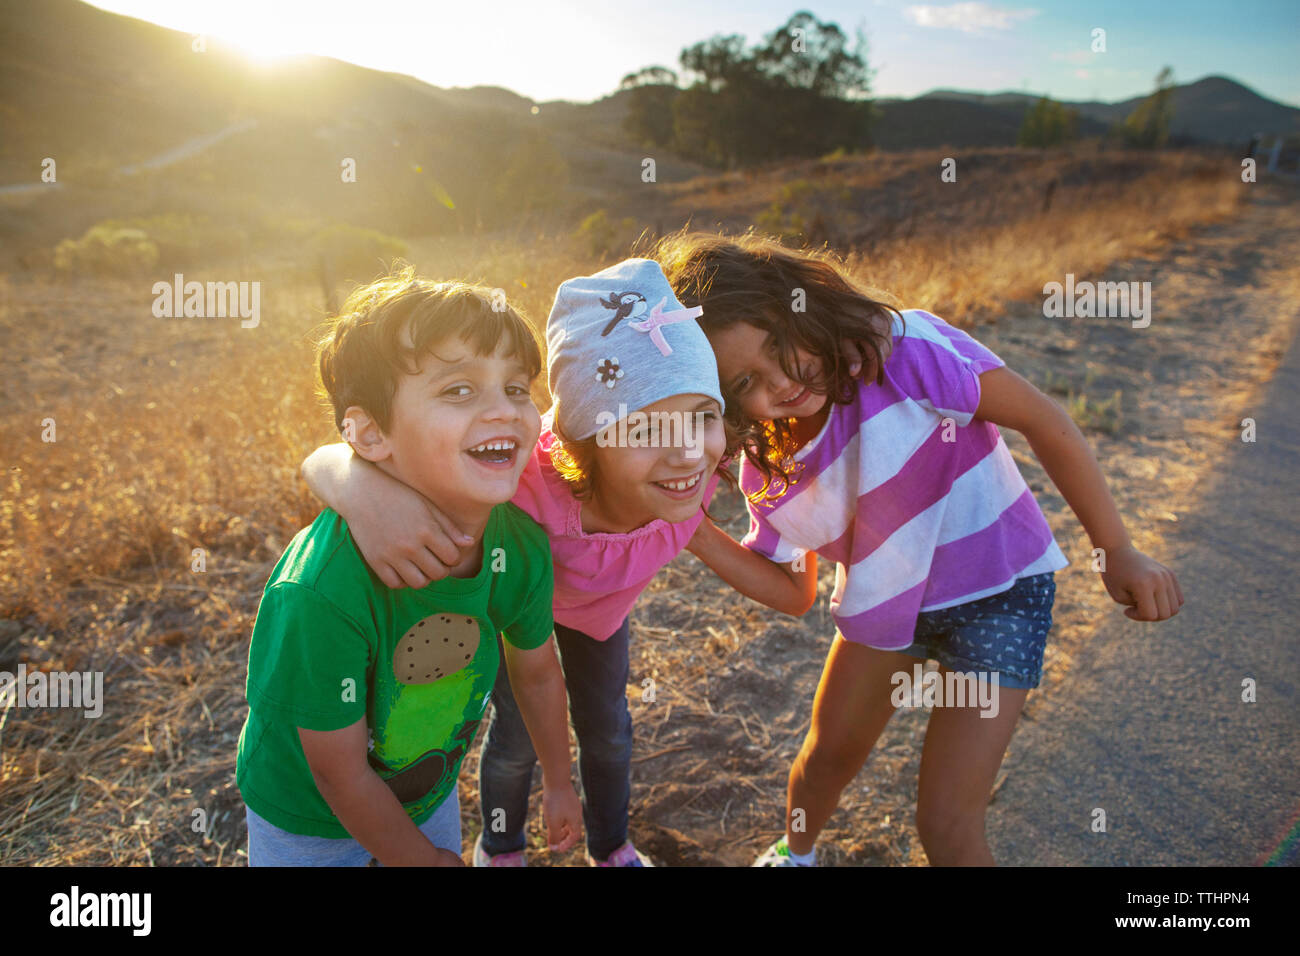 Portrait of boy with sister enjoying on road by field Stock Photo